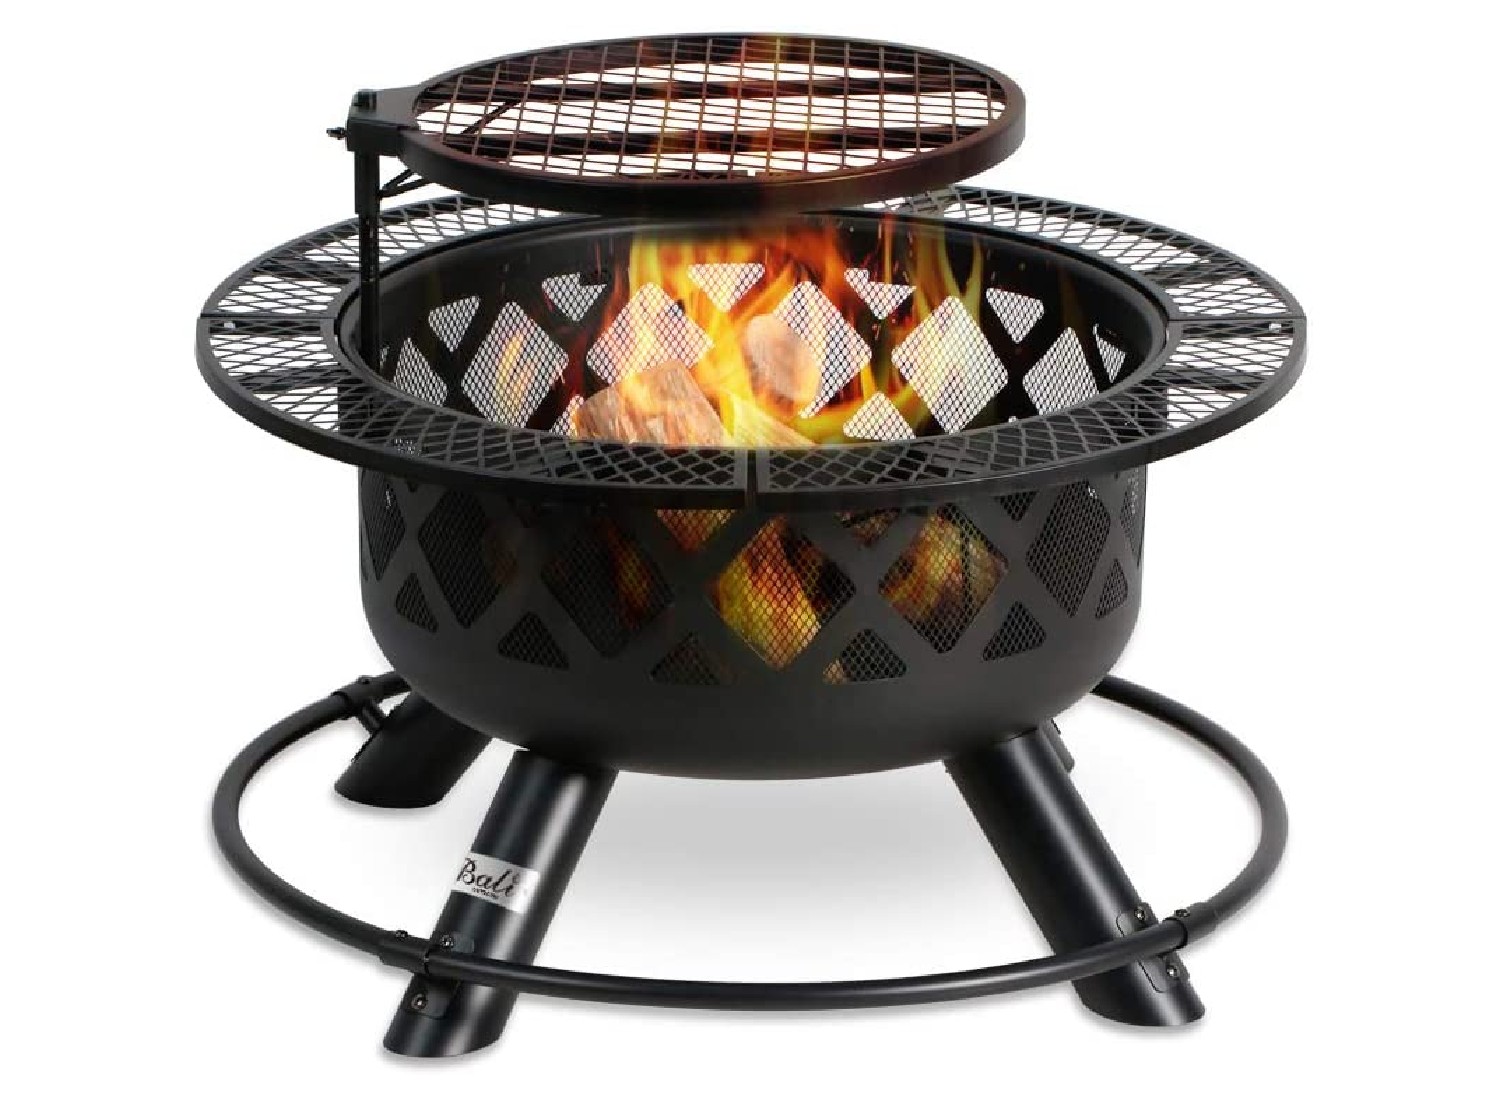 Garden Black Decking TRUESHOPPING Contemporary Garden Fire Pit Bowl Outdoor 74cm Diameter Round Firepit Wood Burner with Handles & Detachable Legs Perfect for Use on Patio